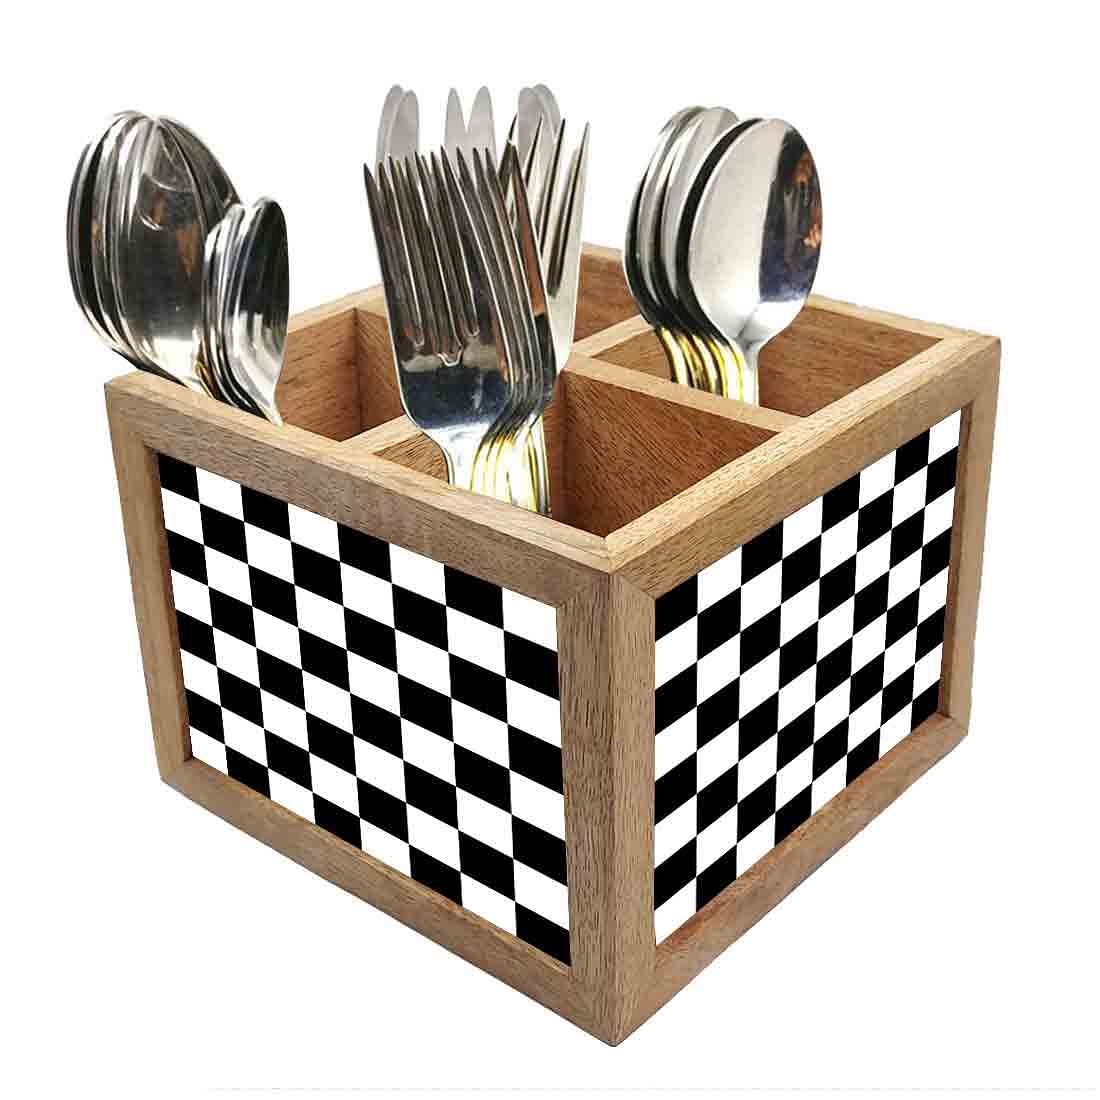 Wooden Cutlery Holder Spoon Rack for Kitchen - Chess Box Nutcase